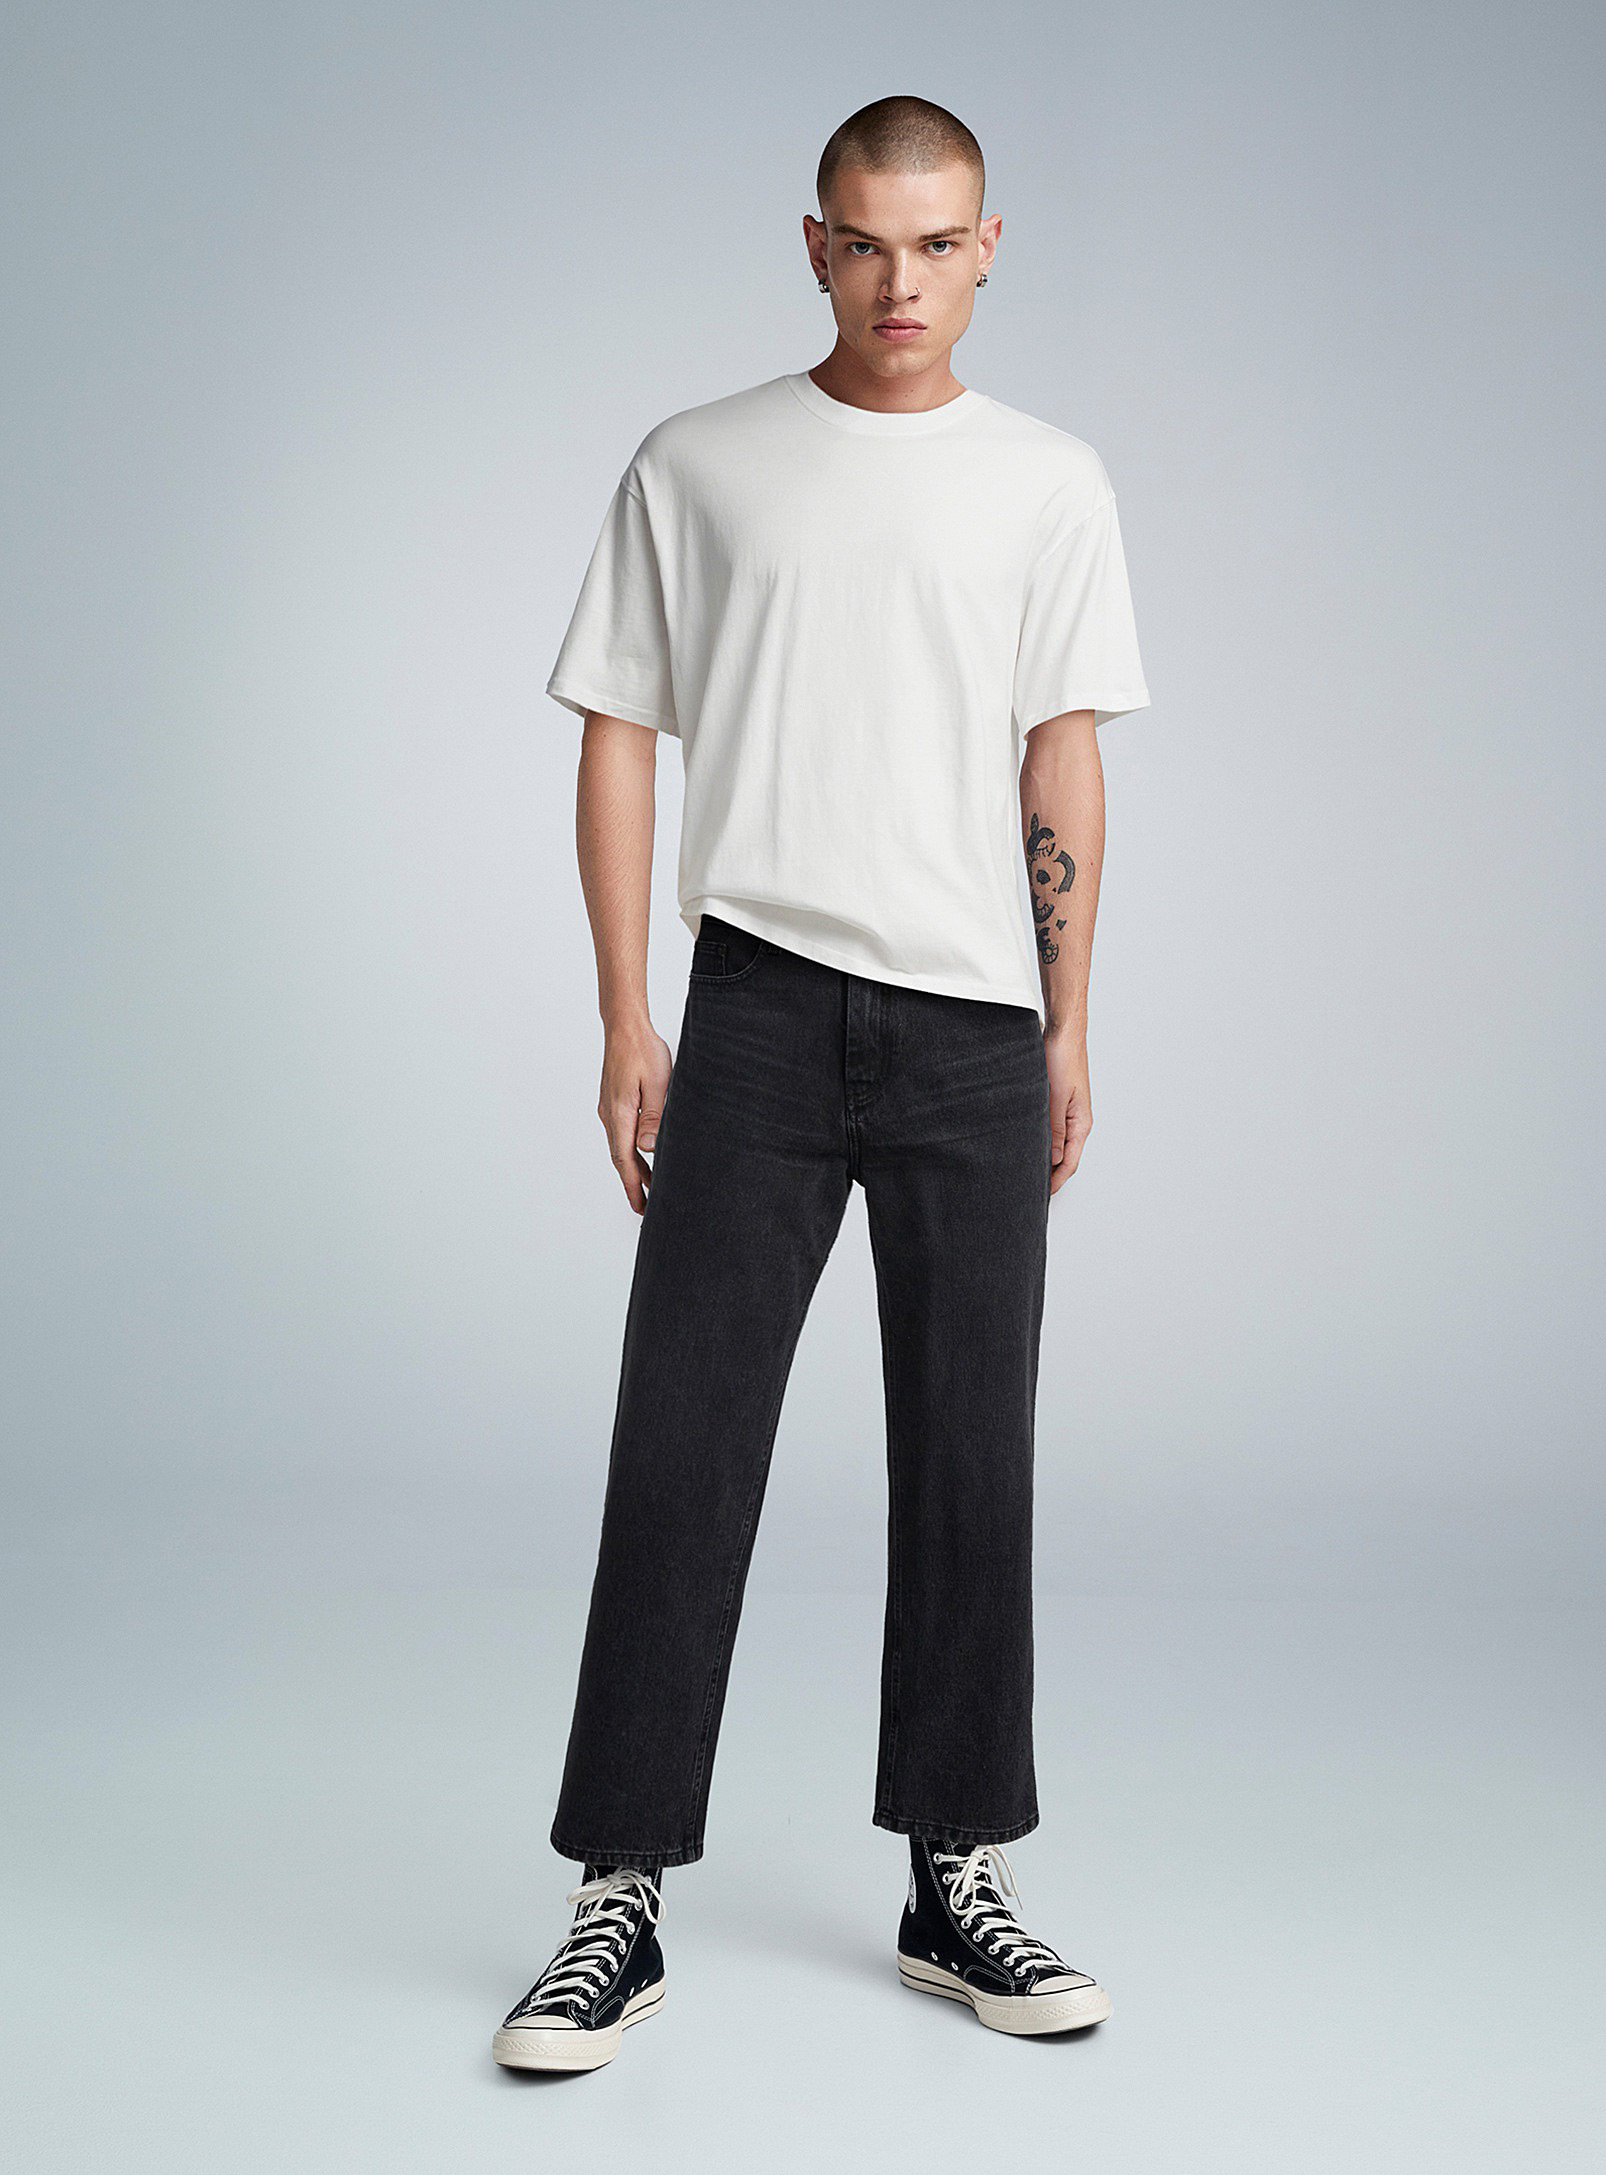 Djab Black 5-pocket Jean Relaxed Fit In Oxford